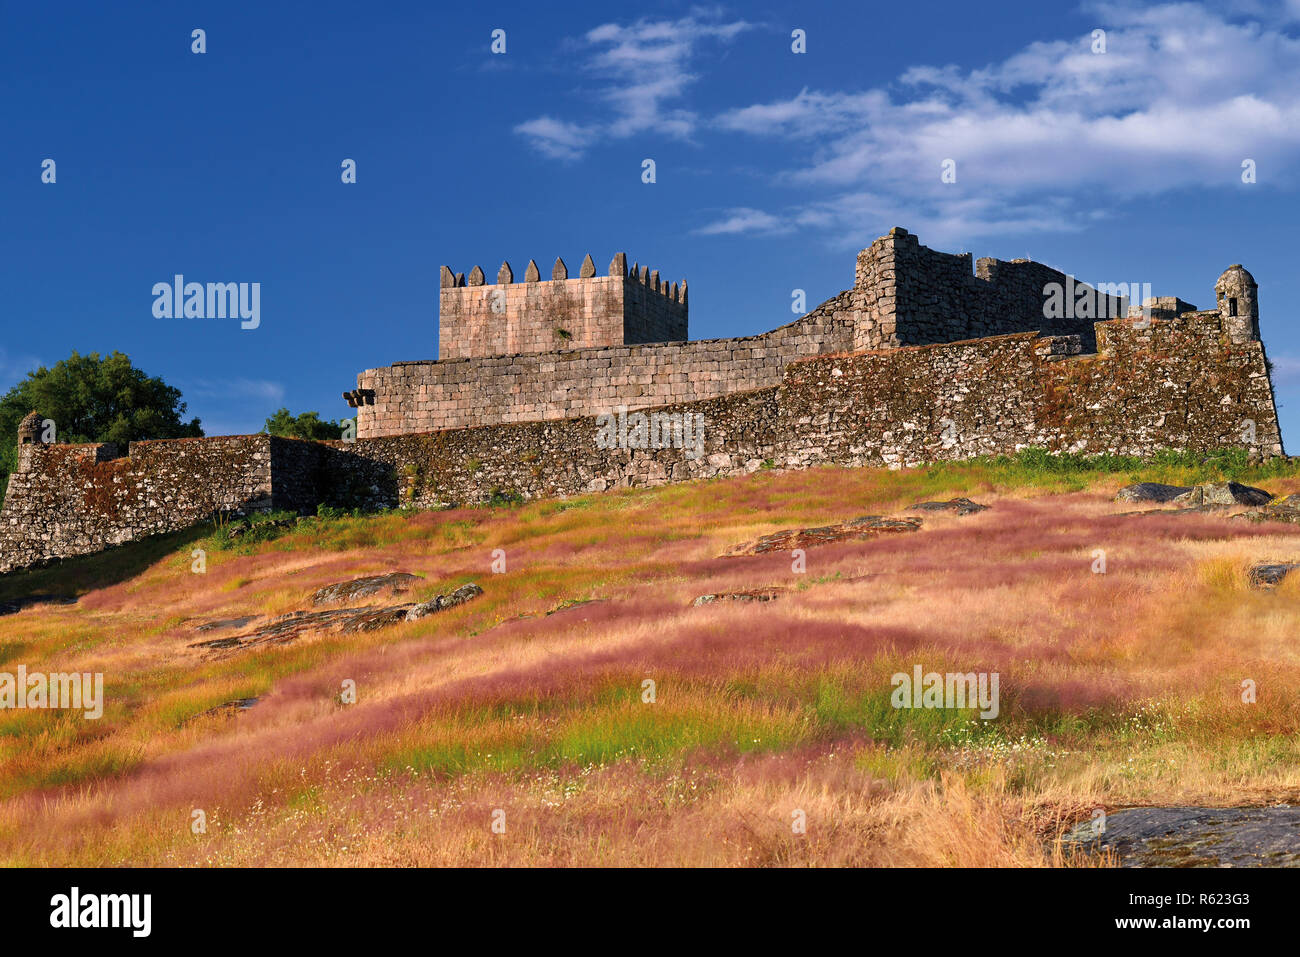 Medieval castle ruin with tower and walls Stock Photo